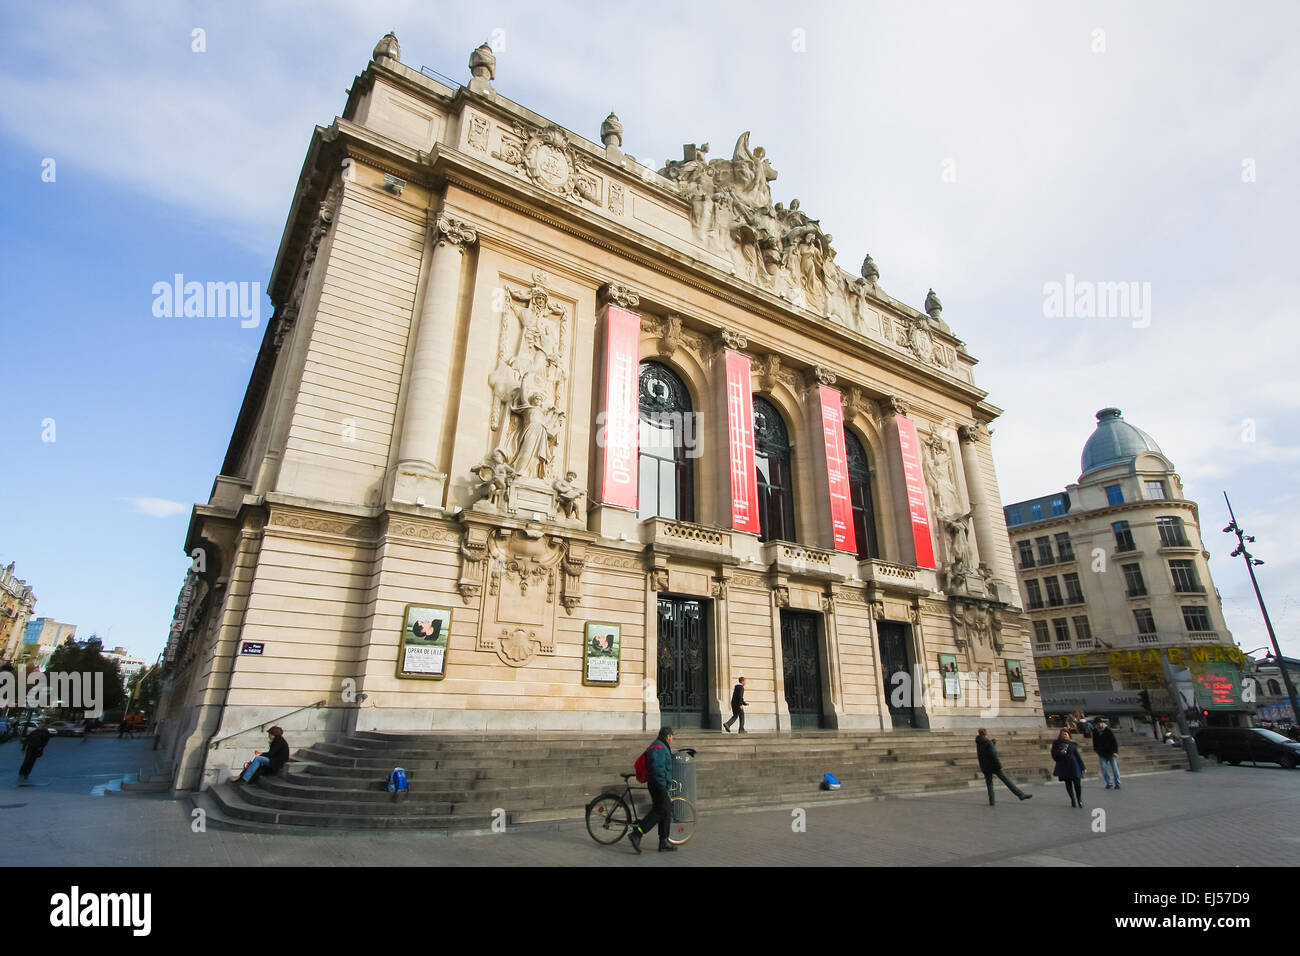 LILLE, FRANCE - NOVEMBER 2, 2009: View on the Opera Building in the center of Lille, France. Stock Photo